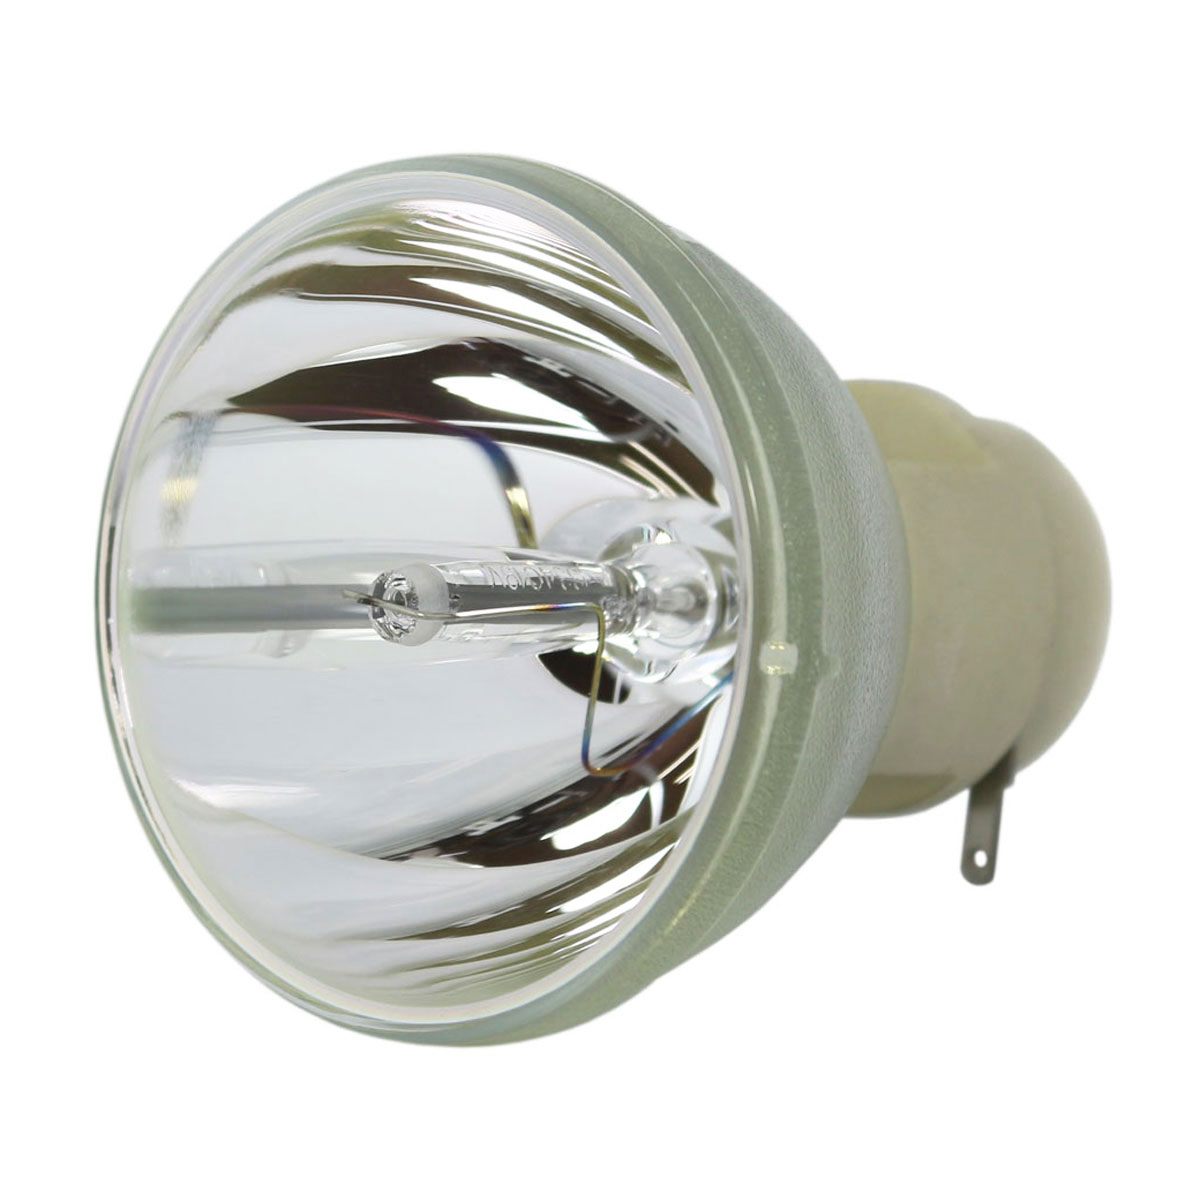 Lutema Economy Bulb for BenQ 5J.J7L05.001 Projector (Lamp Only) - image 1 of 6